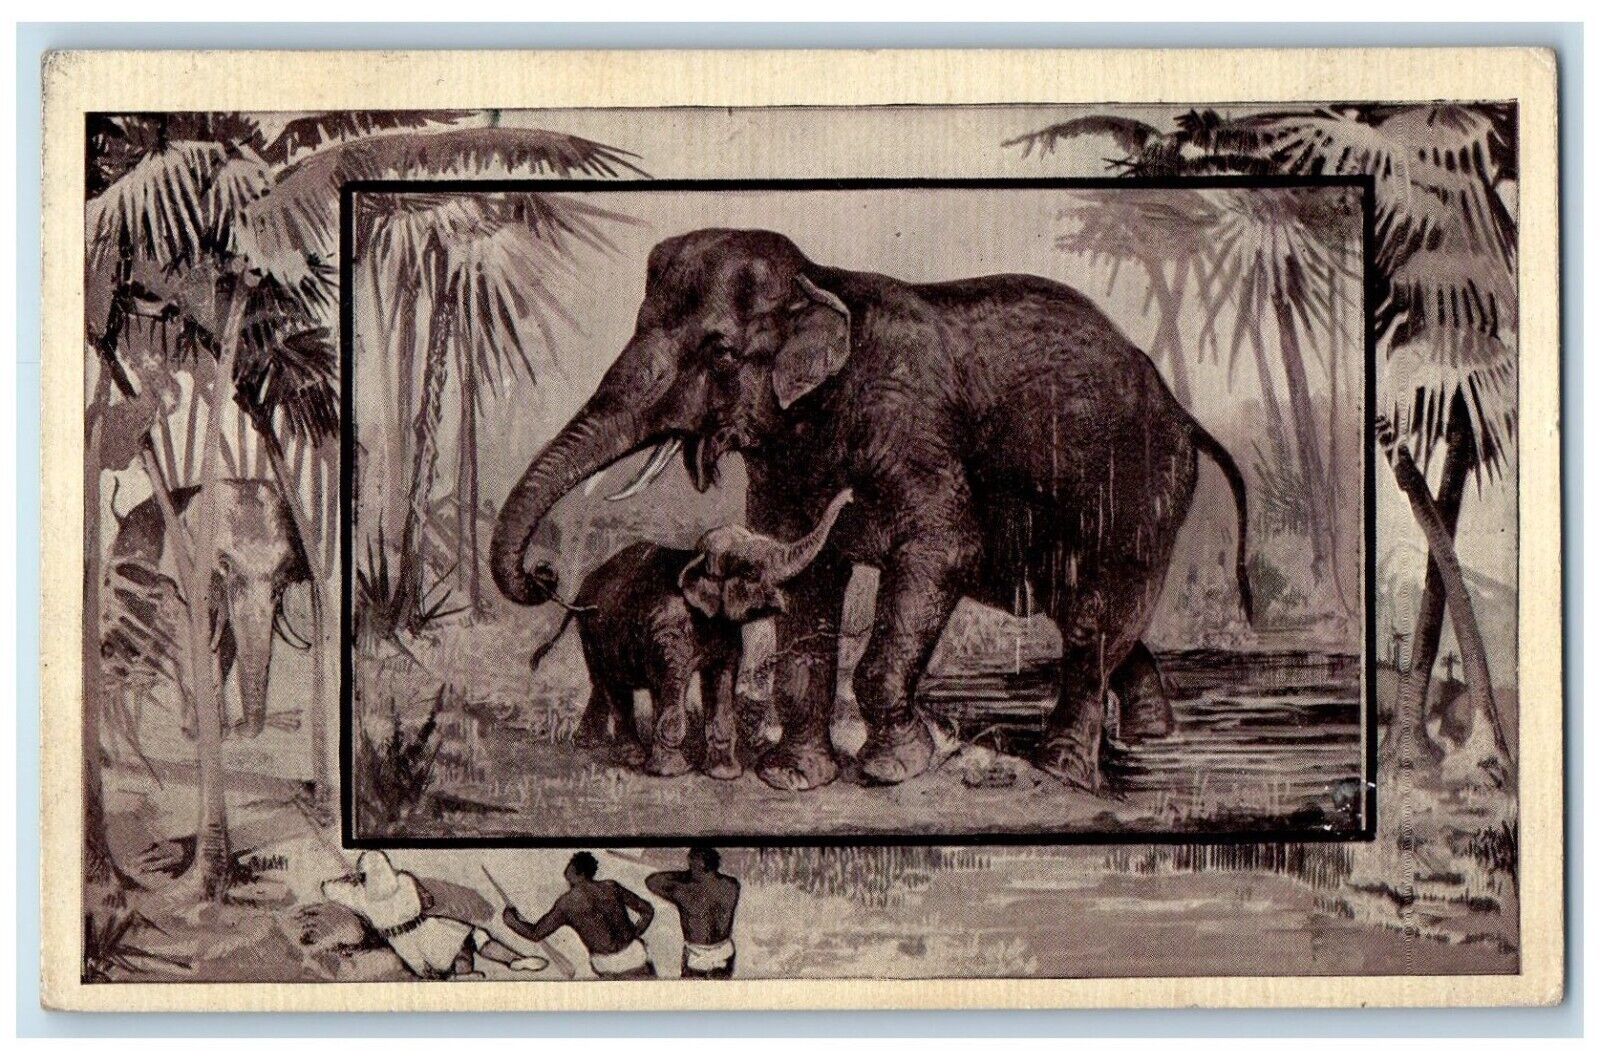 1909 Elephant Wild Animals Hunting Fowler Indiana IN Posted Antique Postcard